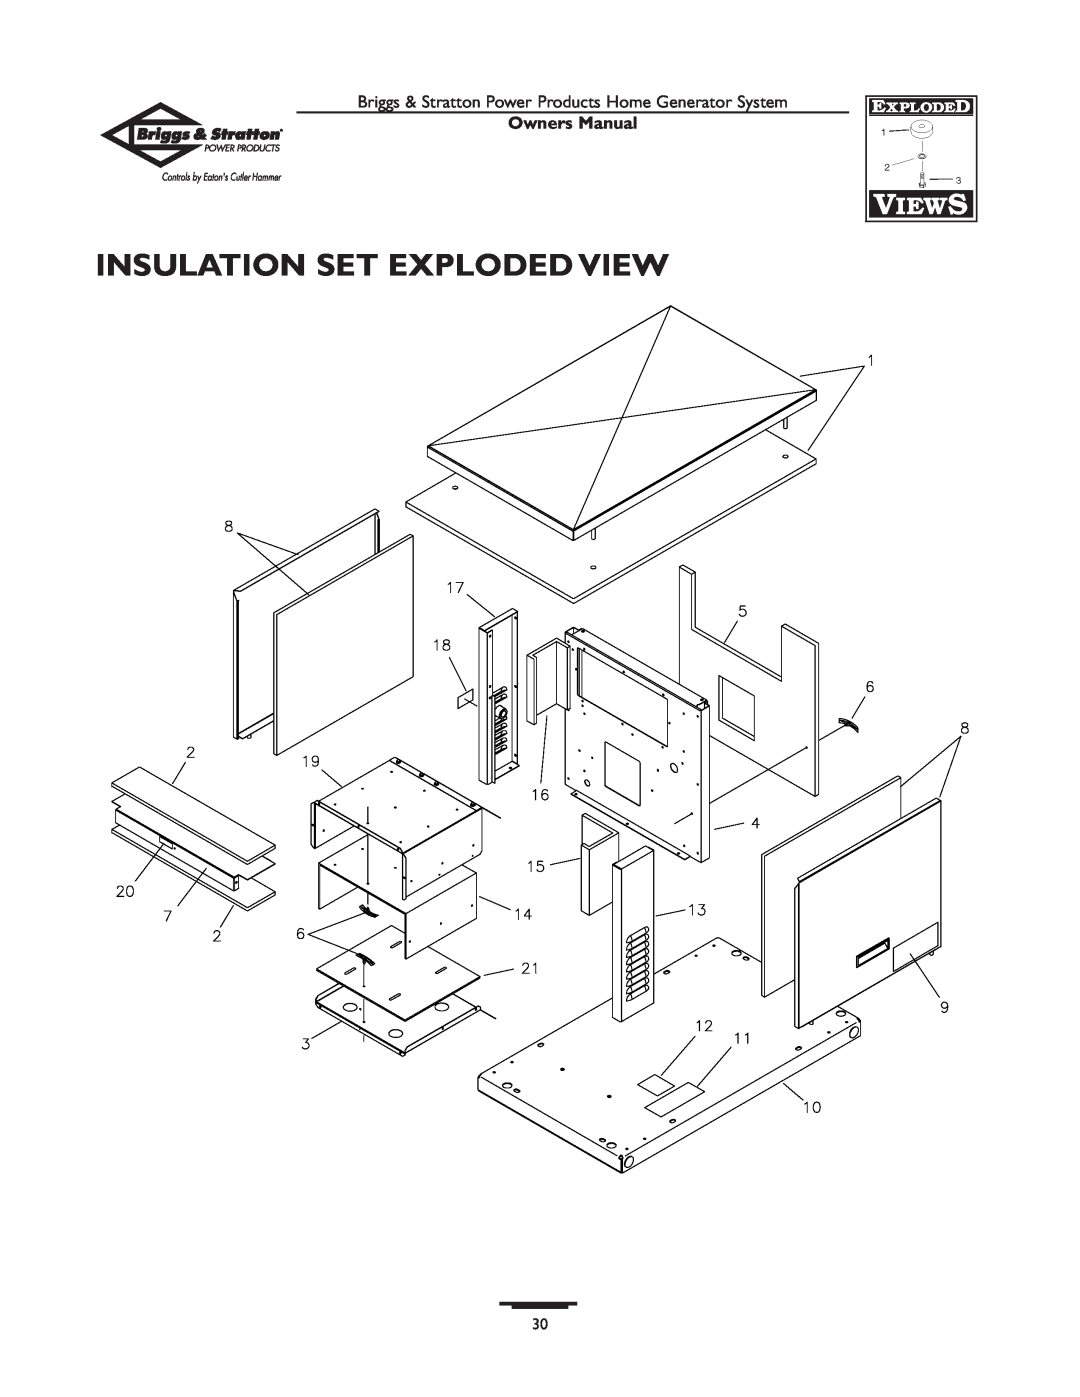 Briggs & Stratton 190839GS owner manual Insulation Set Exploded View, Owners Manual 